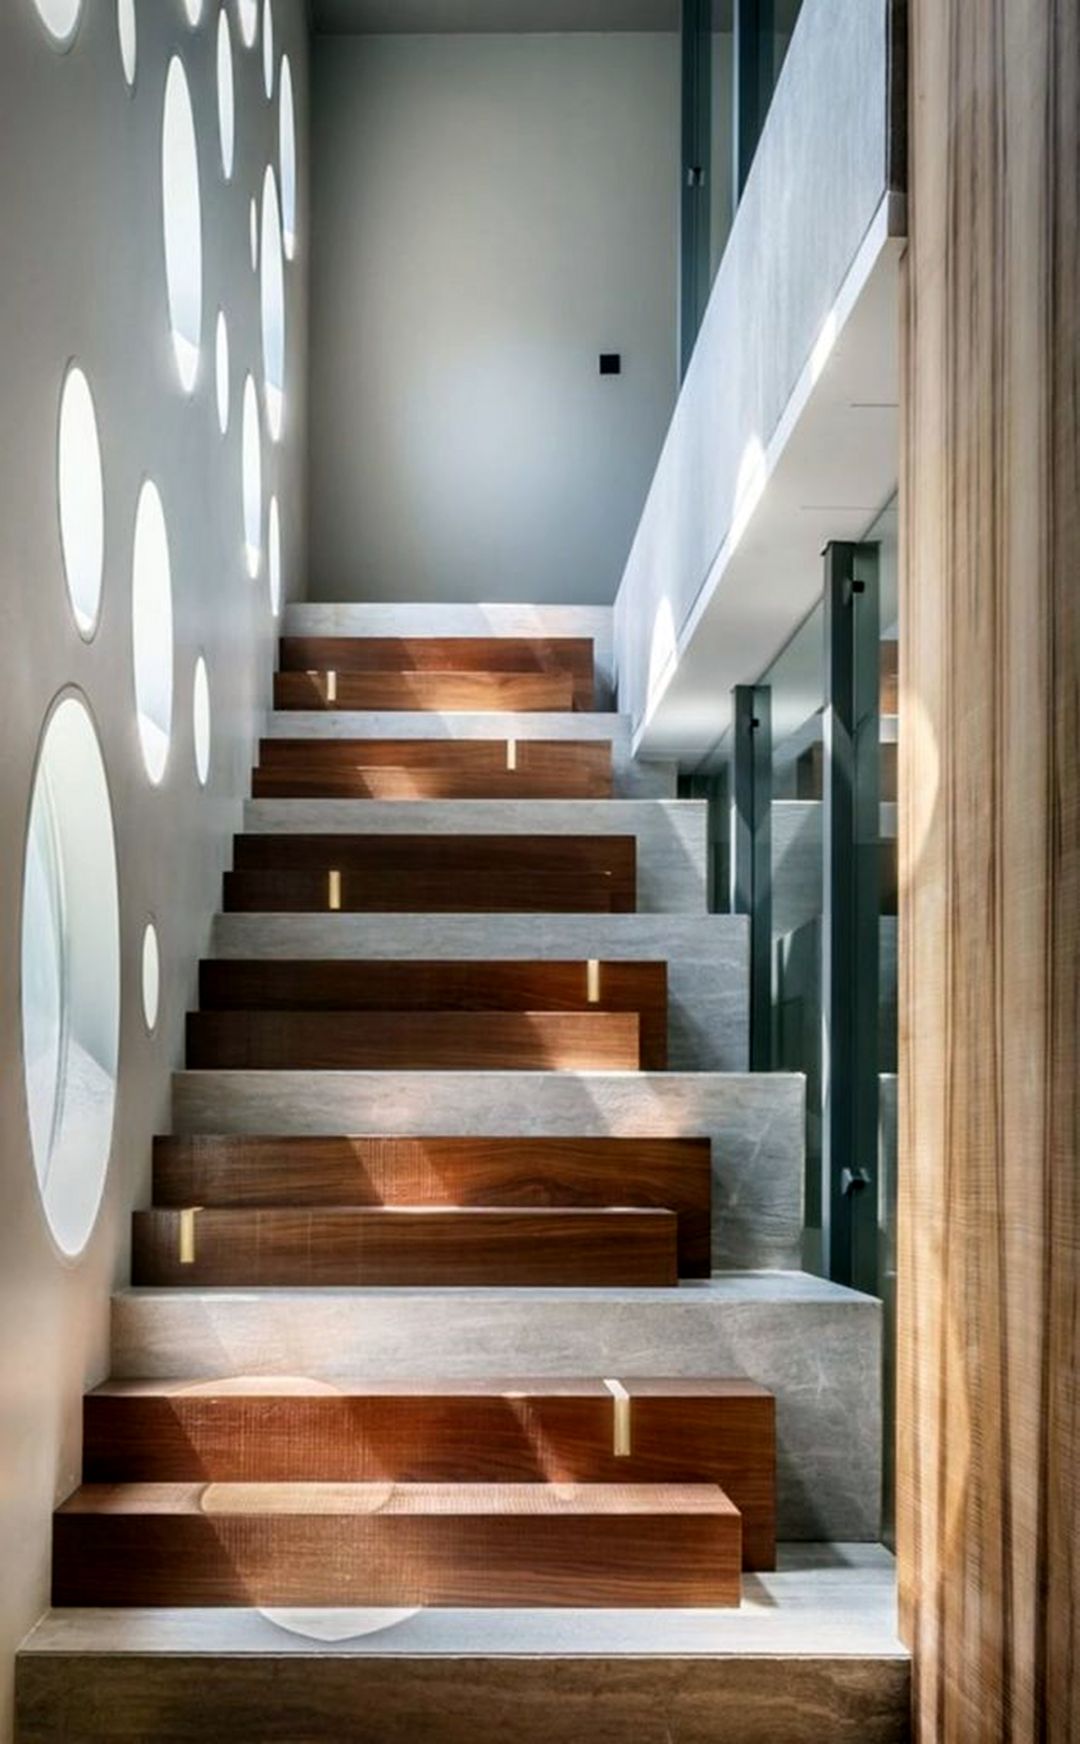 Stairs Design Inside House